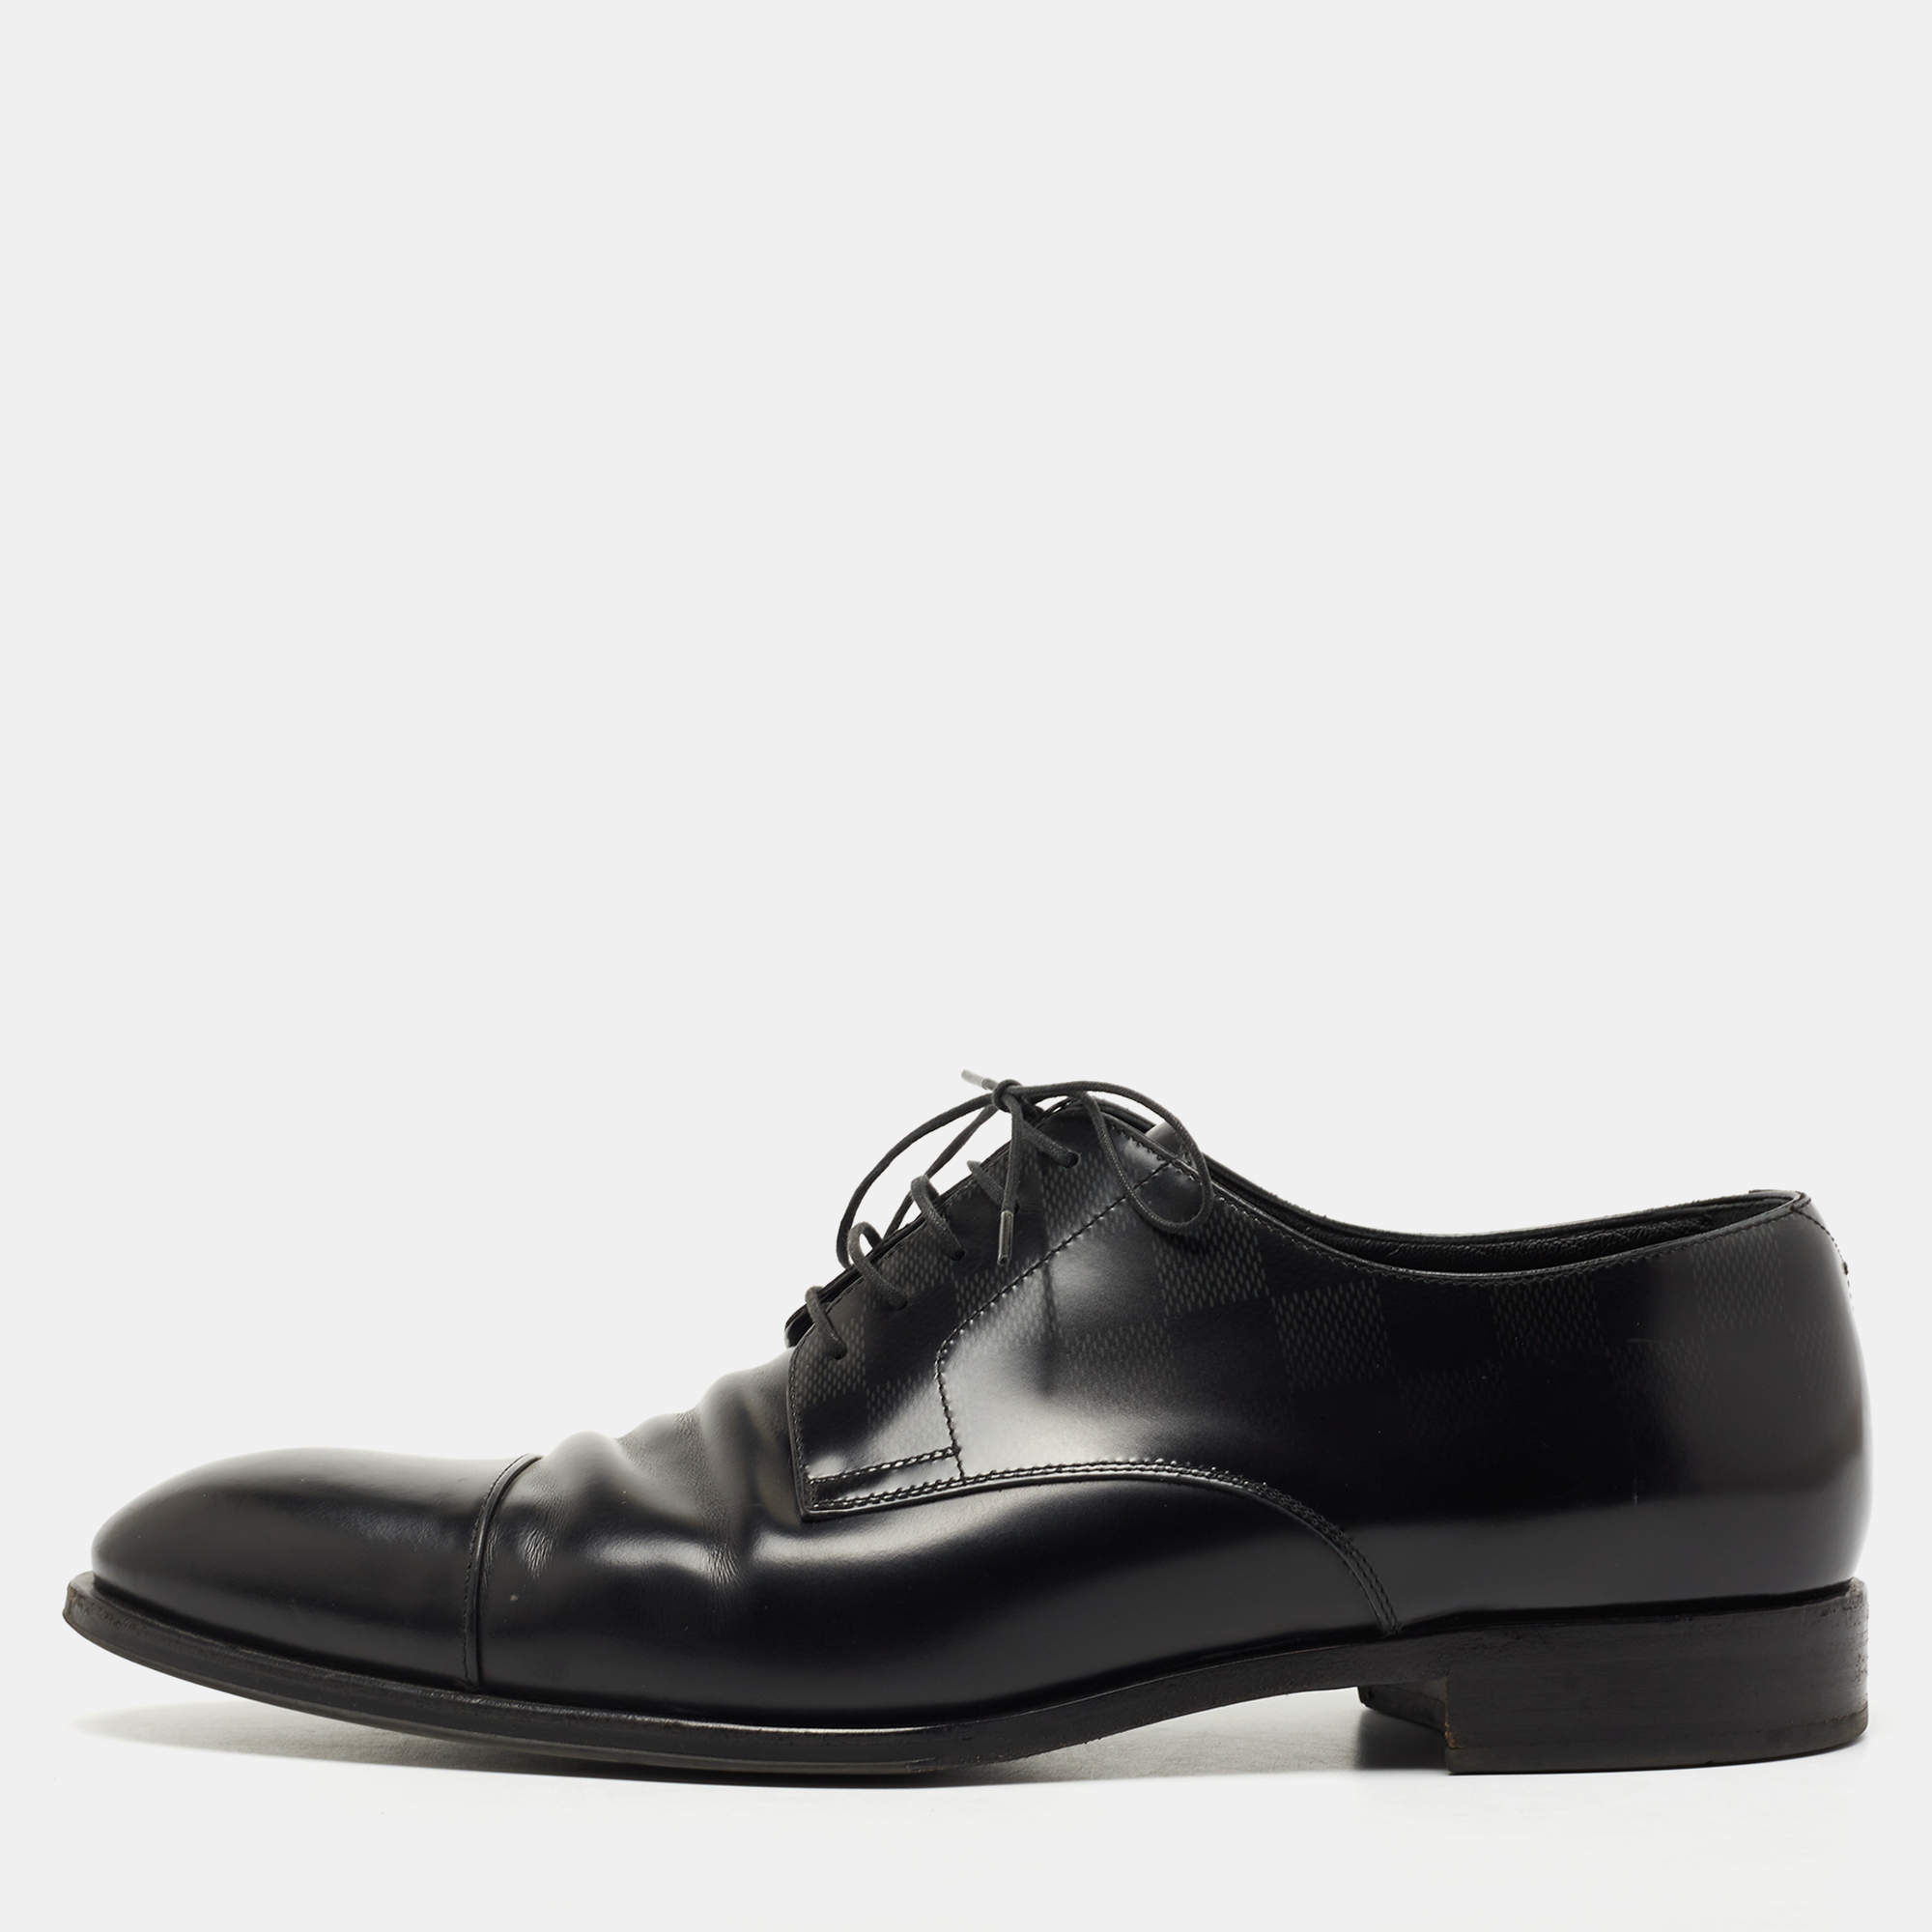 Louis Vuitton Black Damier Embossed Leather Lace Up Oxfords Size 43.5 ...